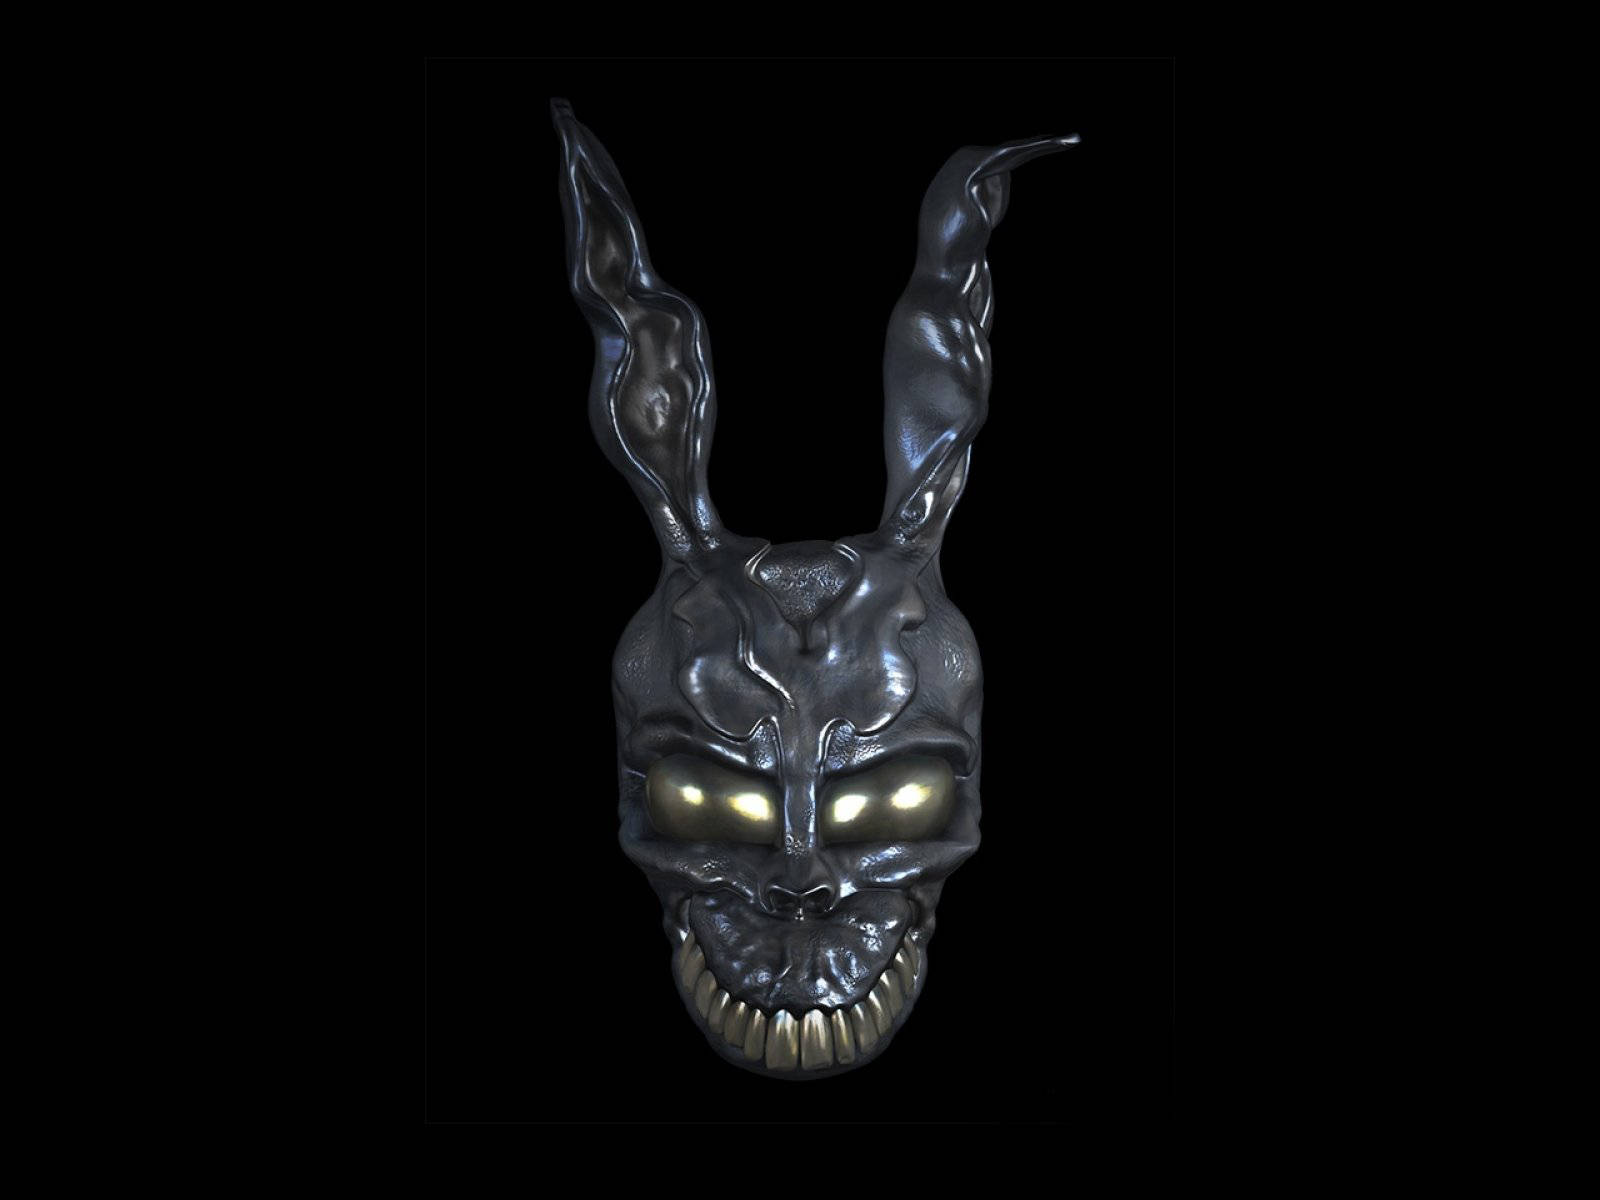 Scary Monster Mask Donnie Darko Wallpaper